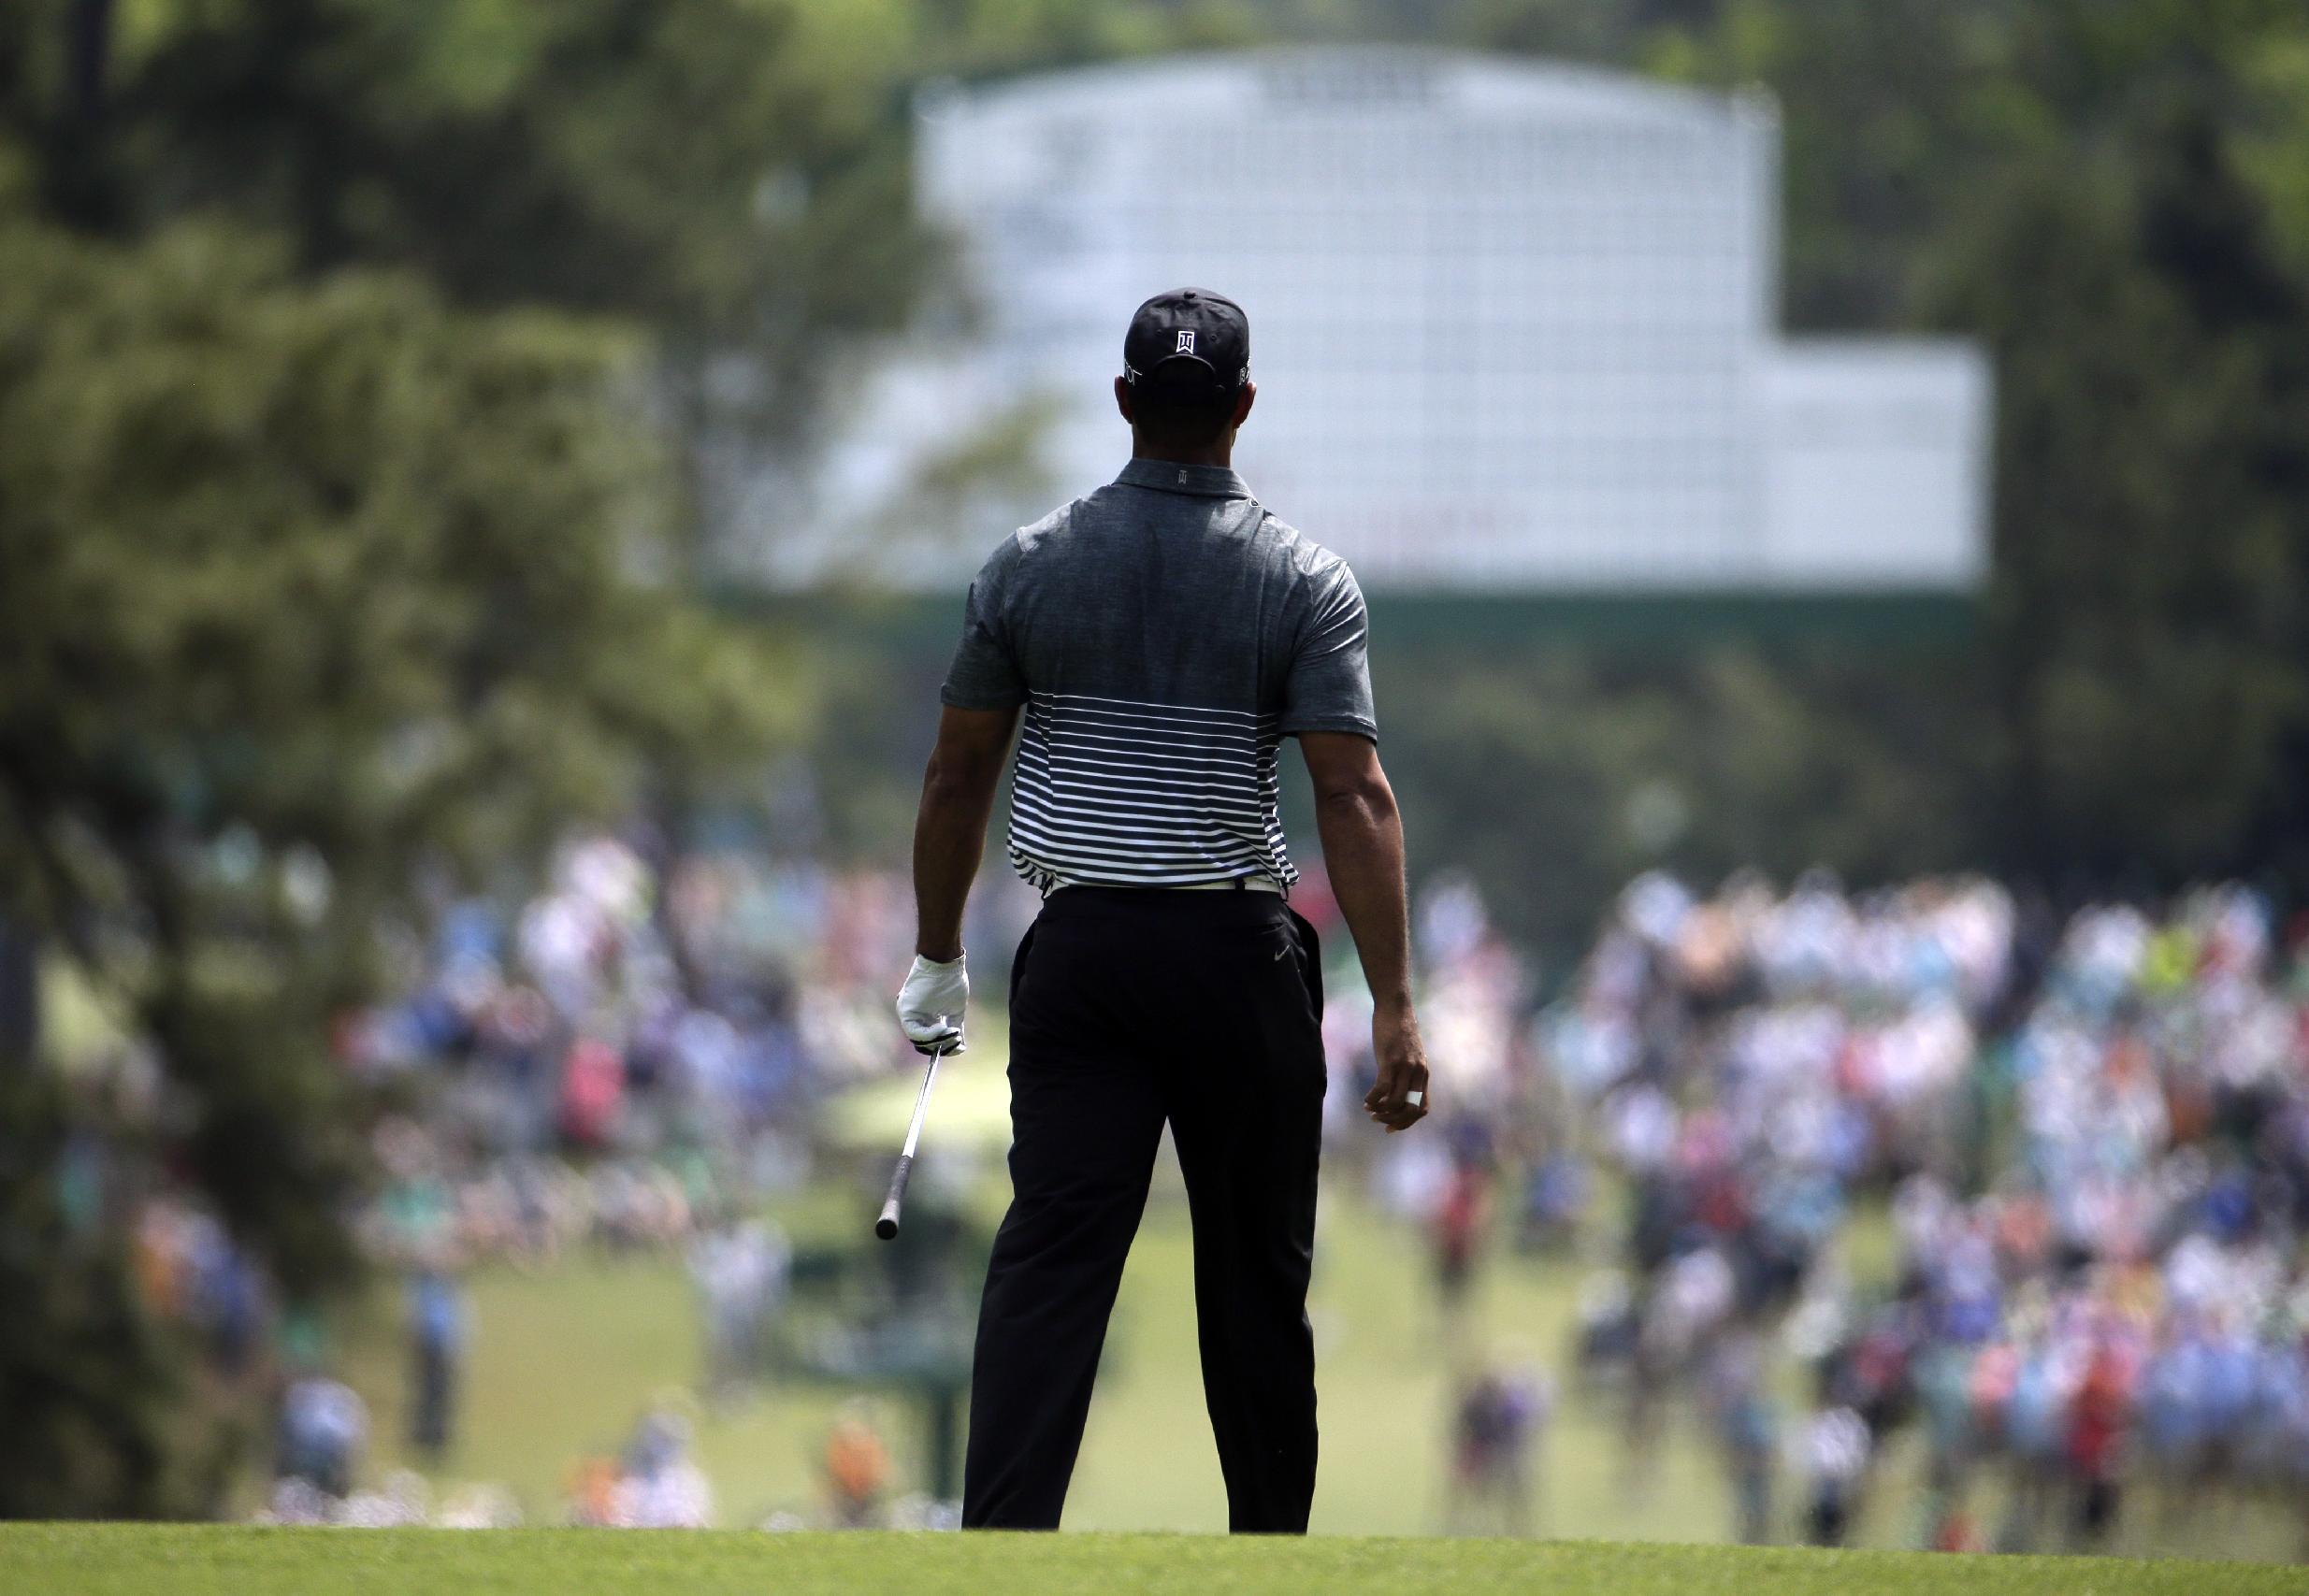 Tiger Woods watches his shot on the second fairway during the third round of the Masters golf tournament Saturday, April 11, 2015, in Augusta, Ga. (AP Photo/Charlie Riedel)